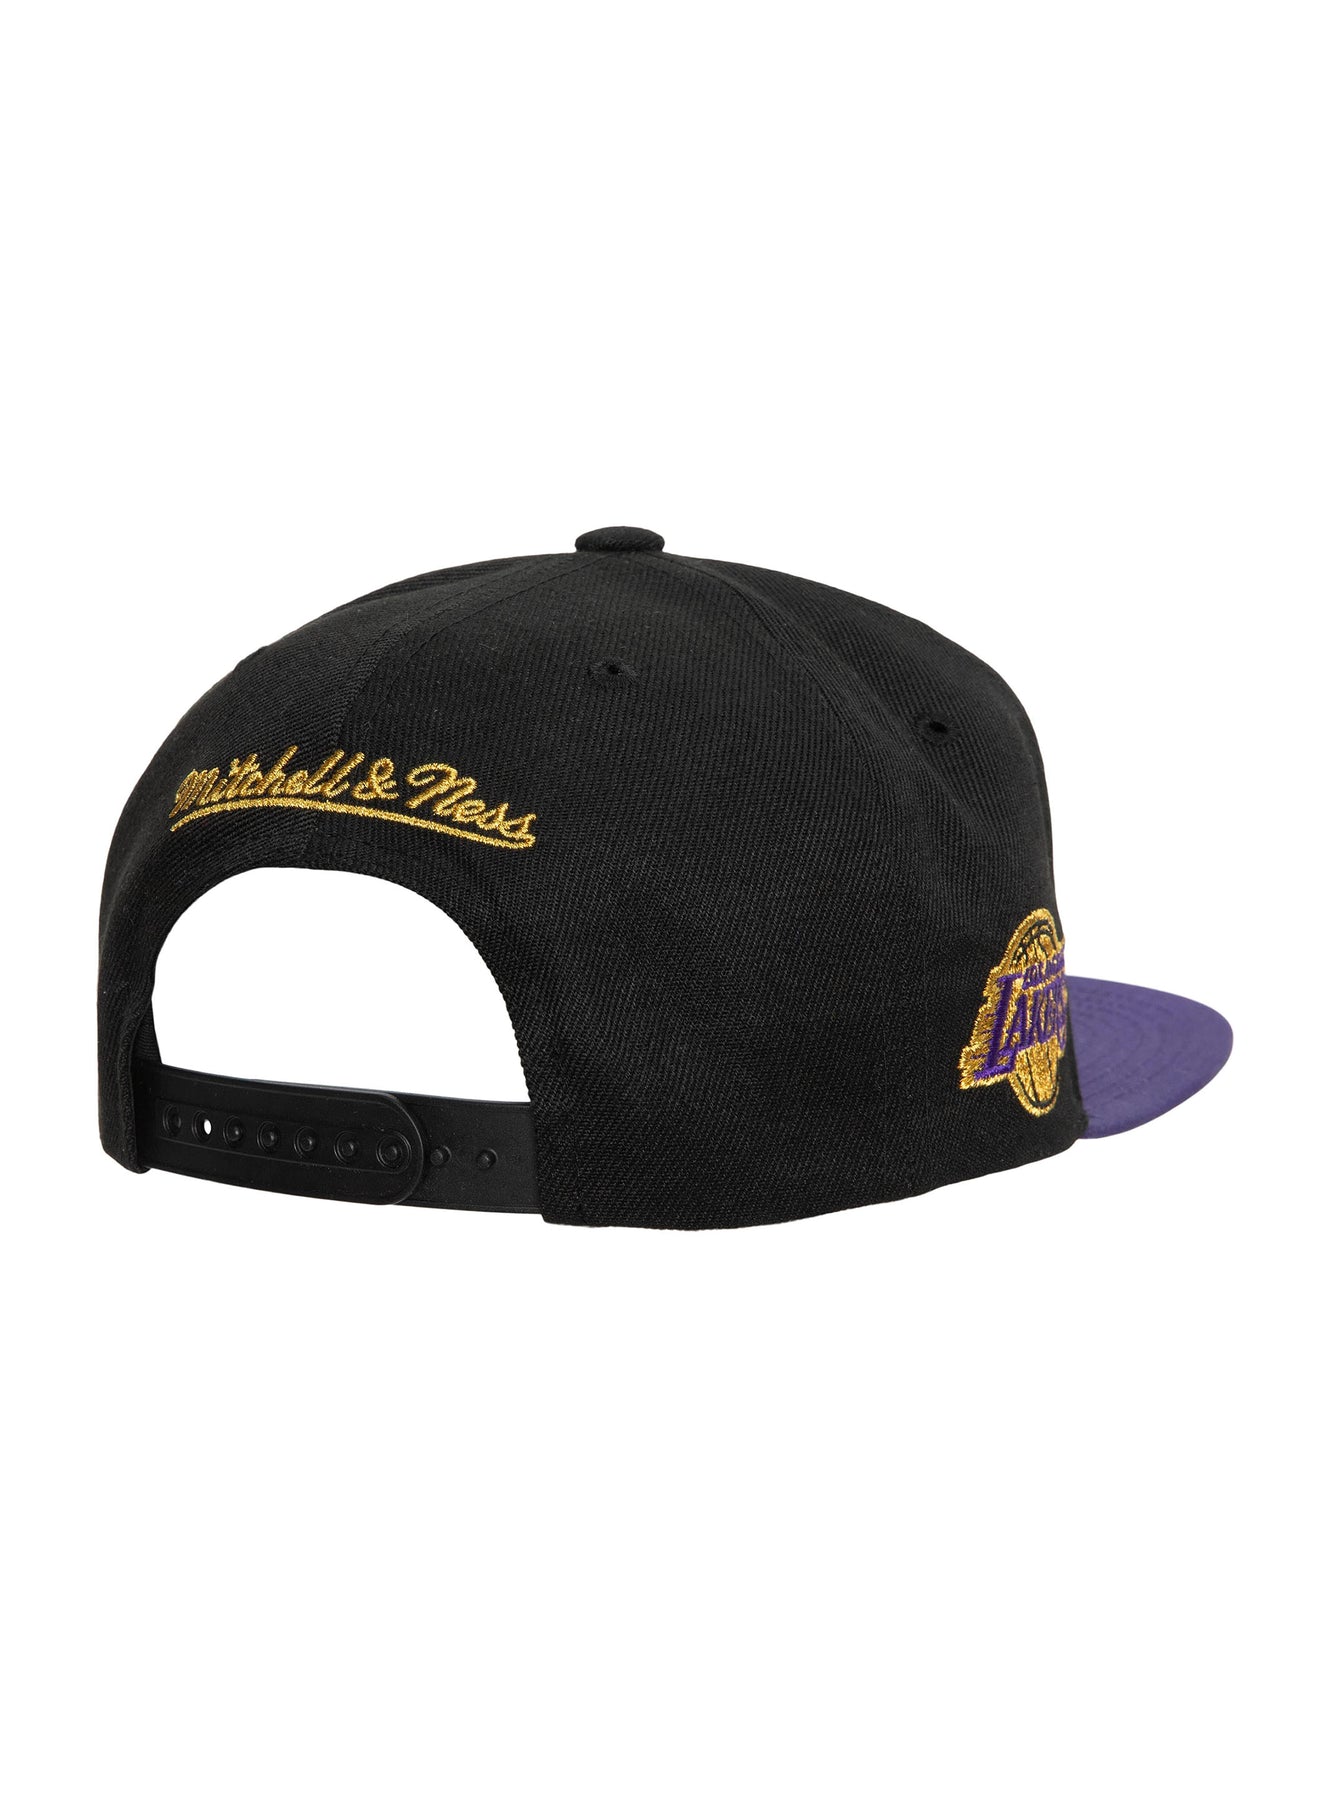 lakers gold hat